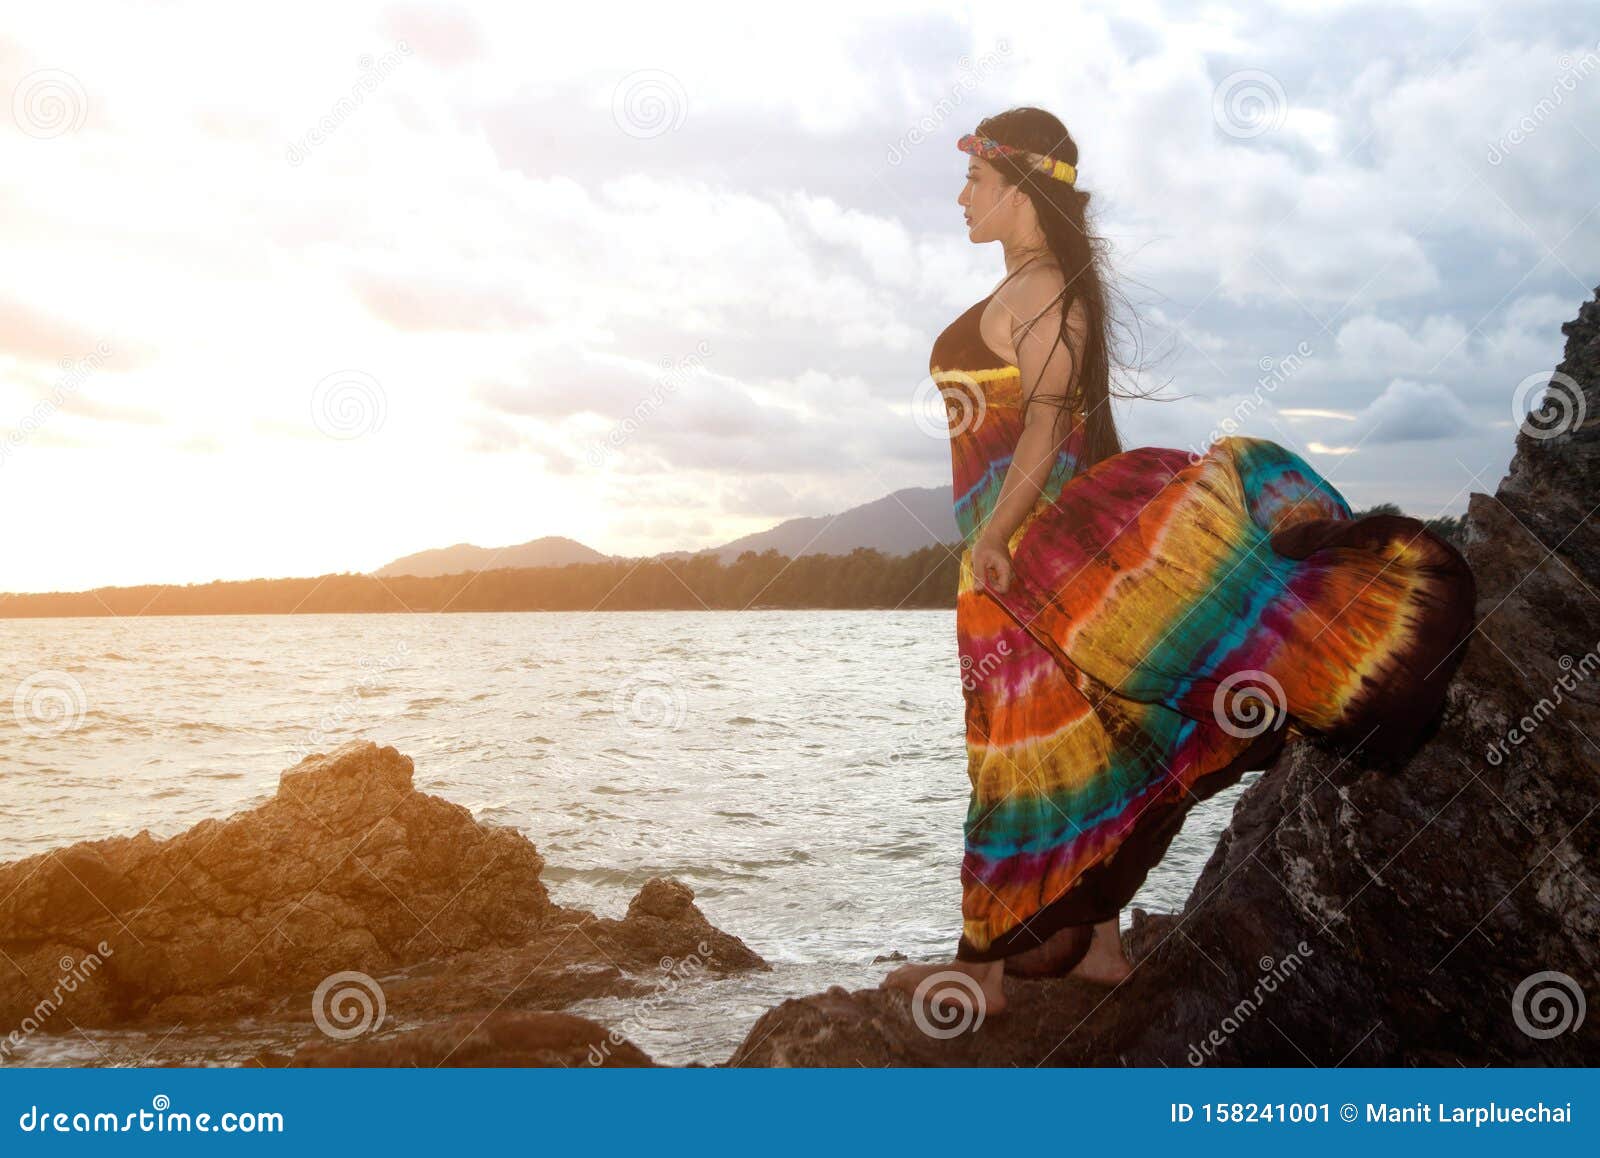 Beach Nude Chubby - Asian Plus Size Fat and Overweight Woman in a Colorful Dresses Standing on  Rock at the Beach. Stock Image - Image of rock, pose: 158241001